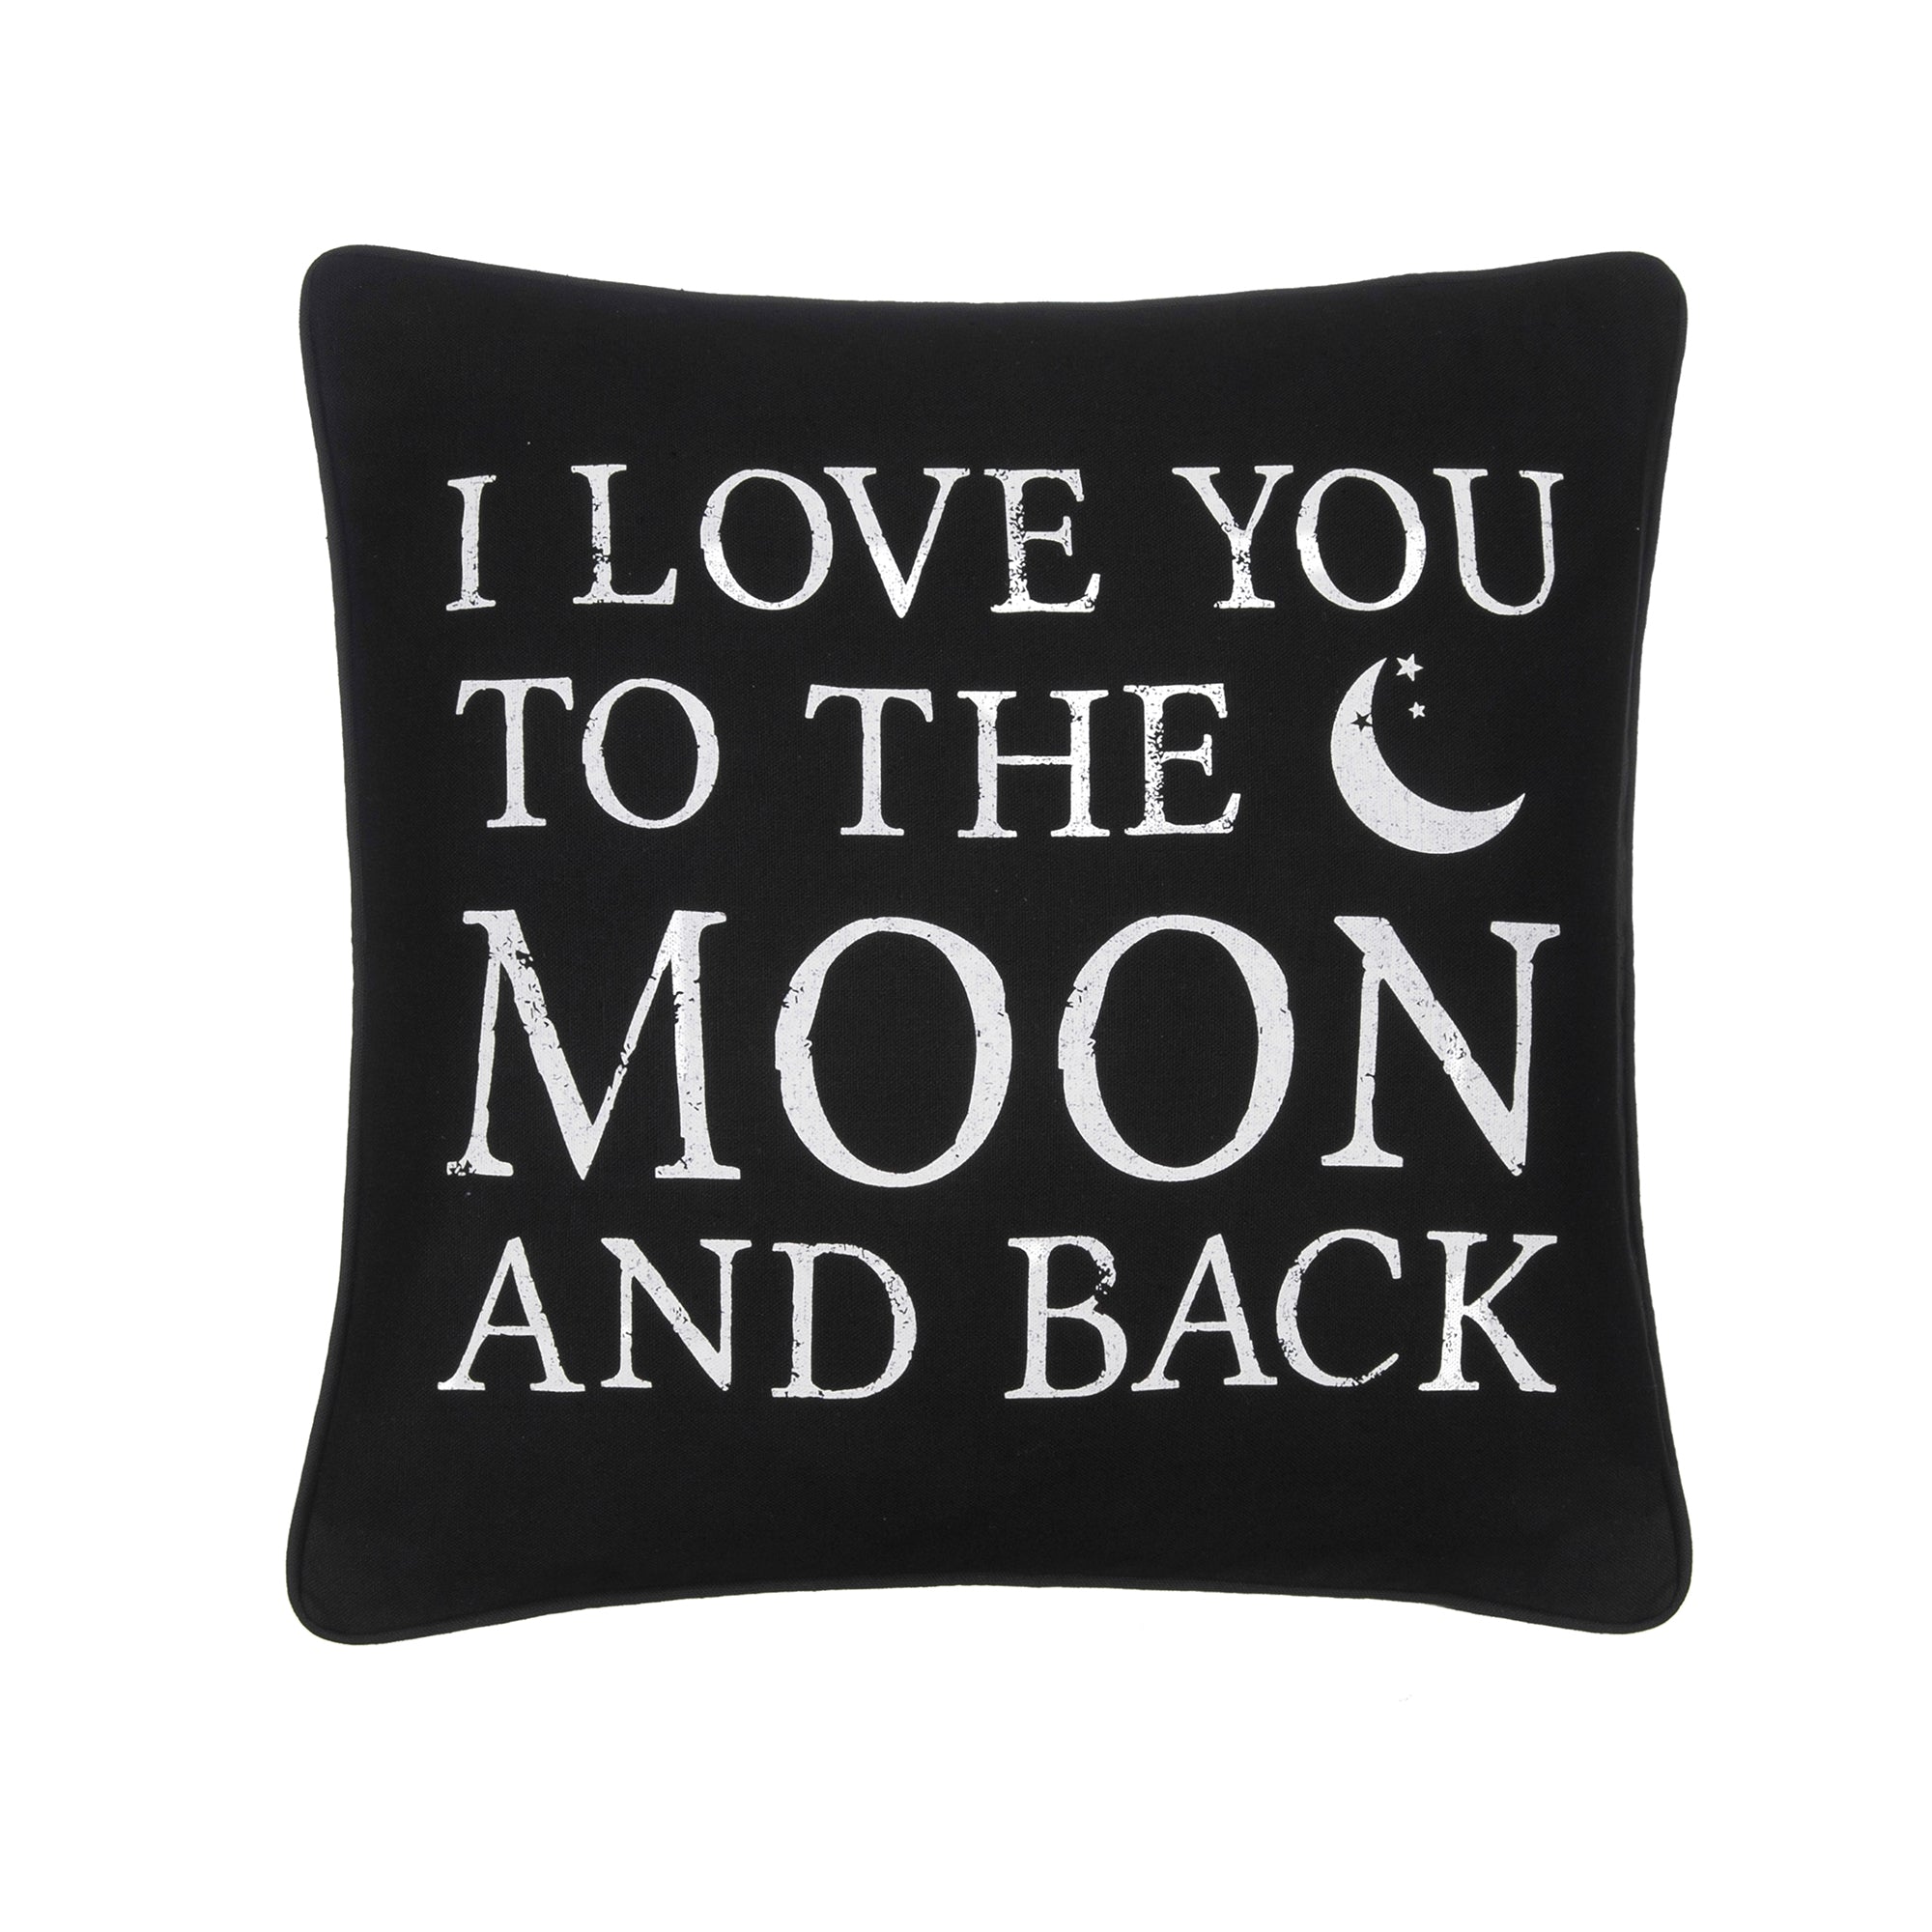 I love you to the moon 20x20 pillow